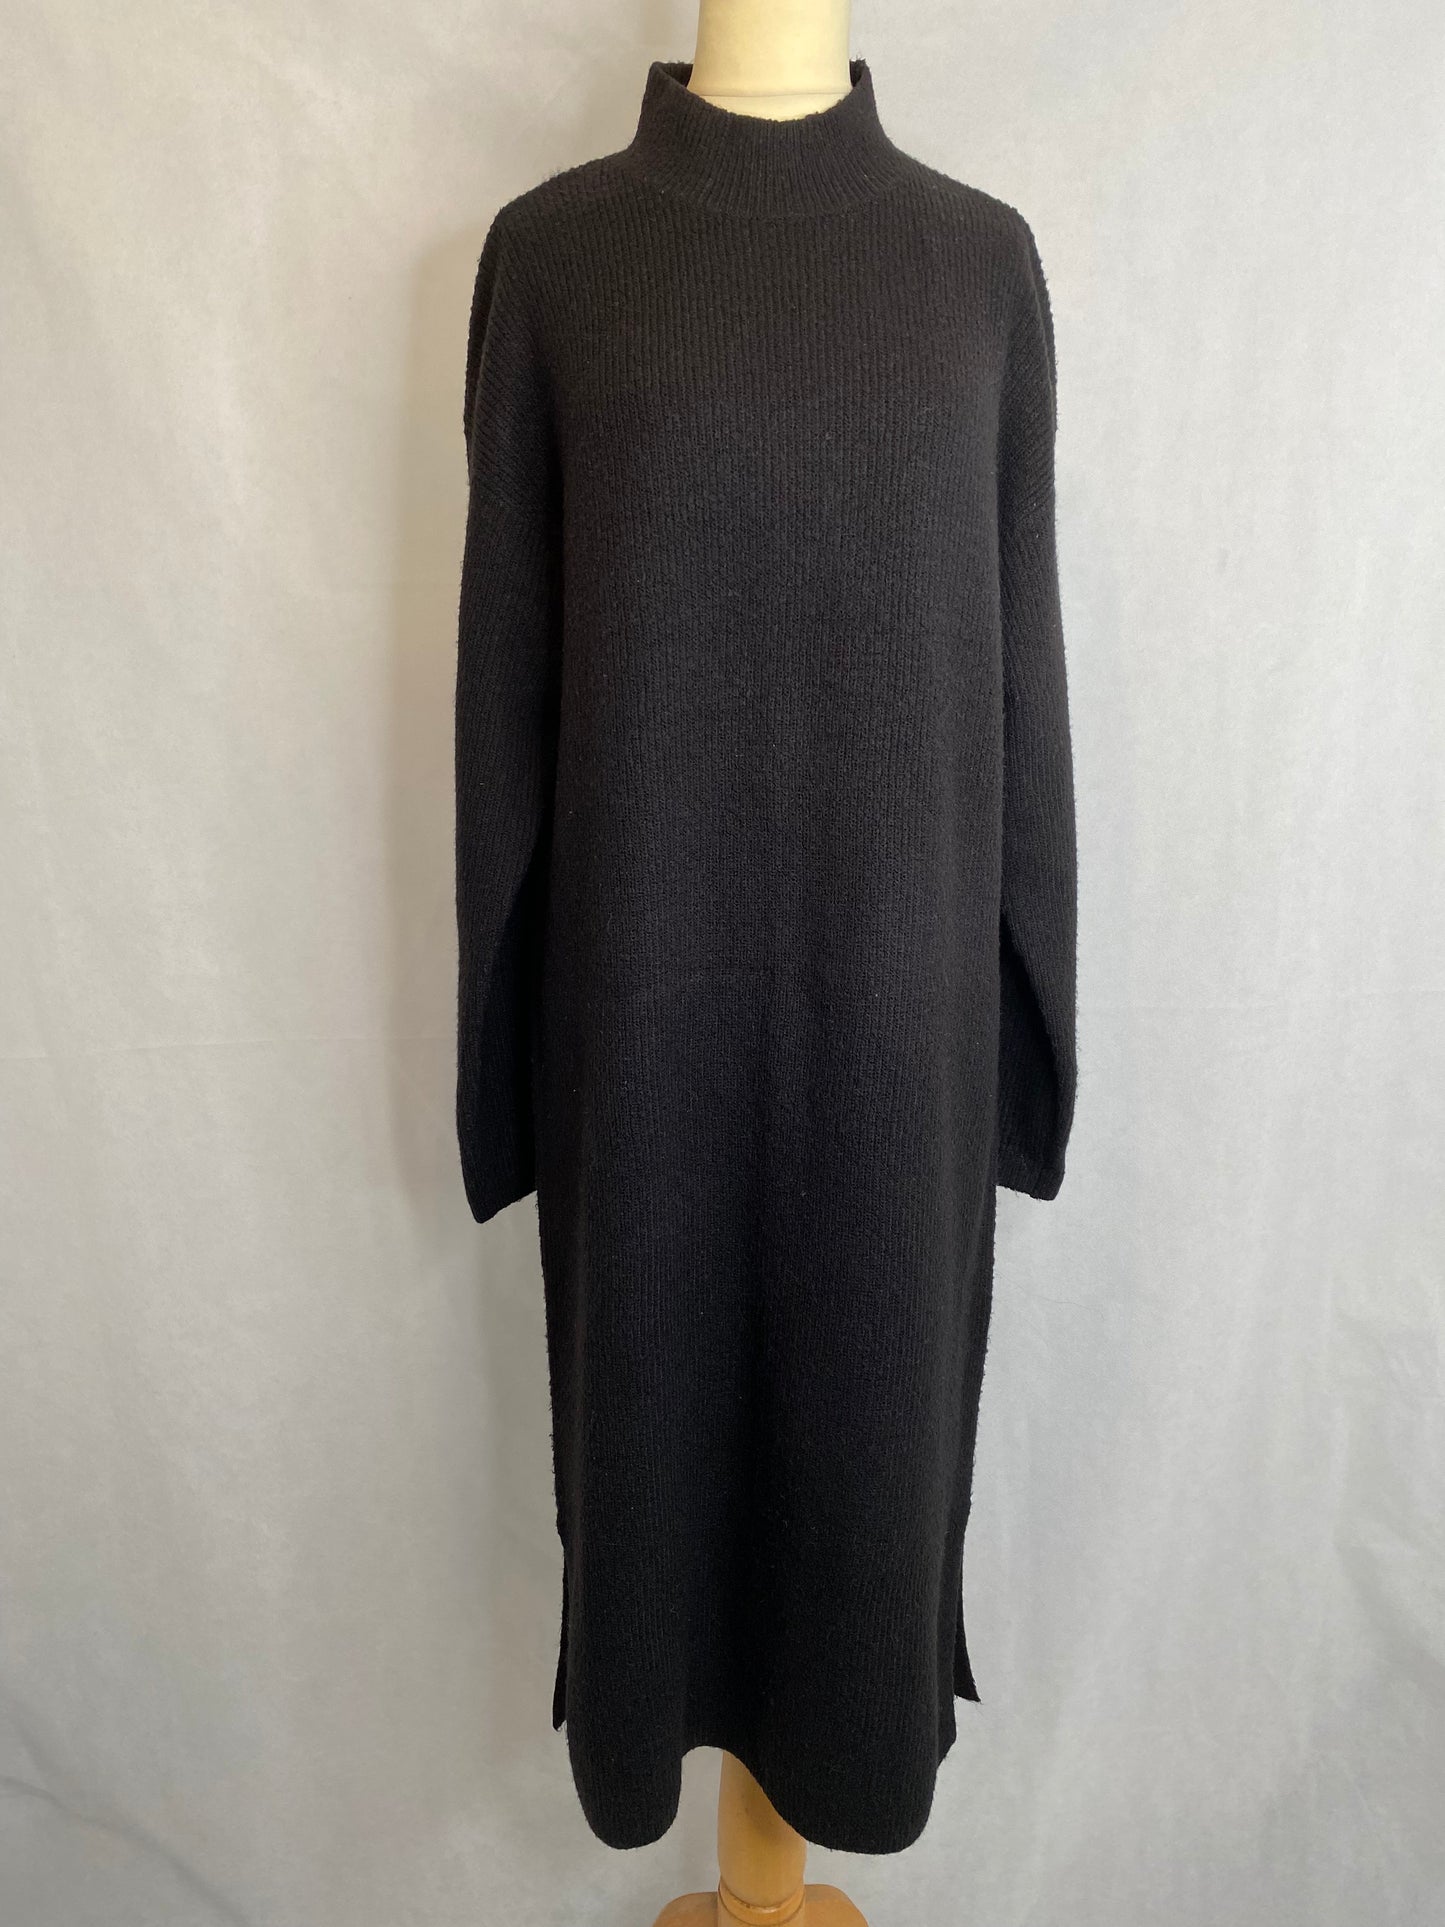 New  Look - L/12 - poloneck long sweater dress